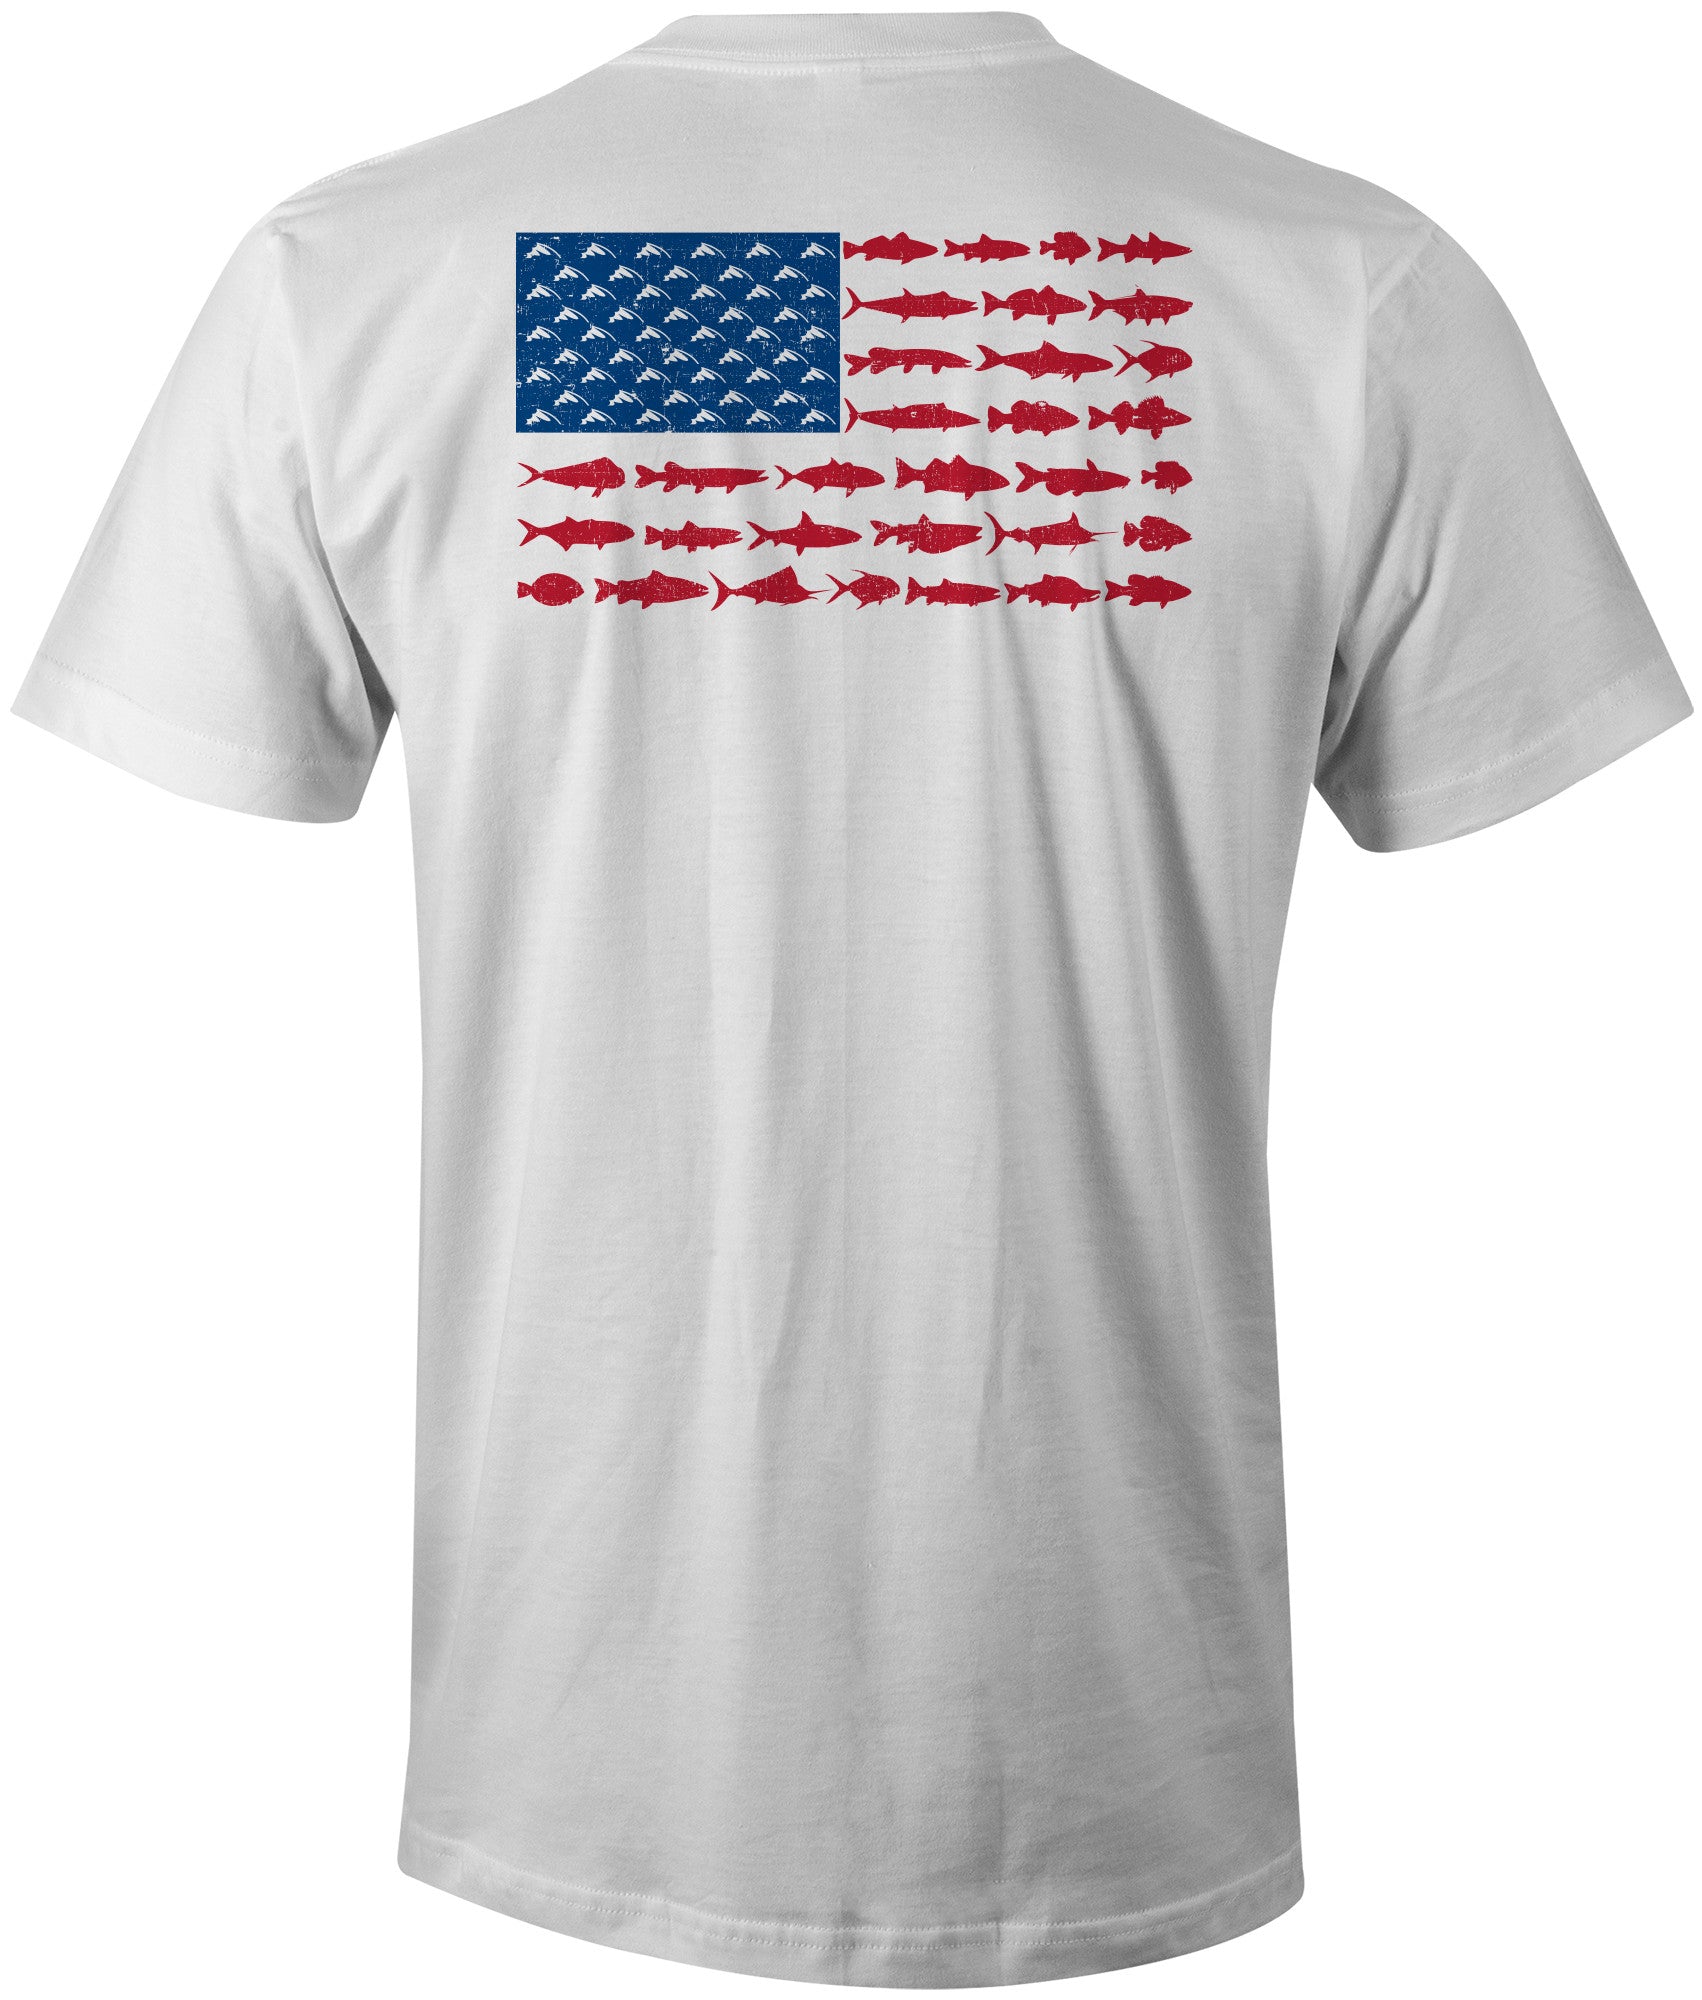 Distressed American Flag T-Shirt (White) Fish Hook Bracelets | Chasing Fin Apparel